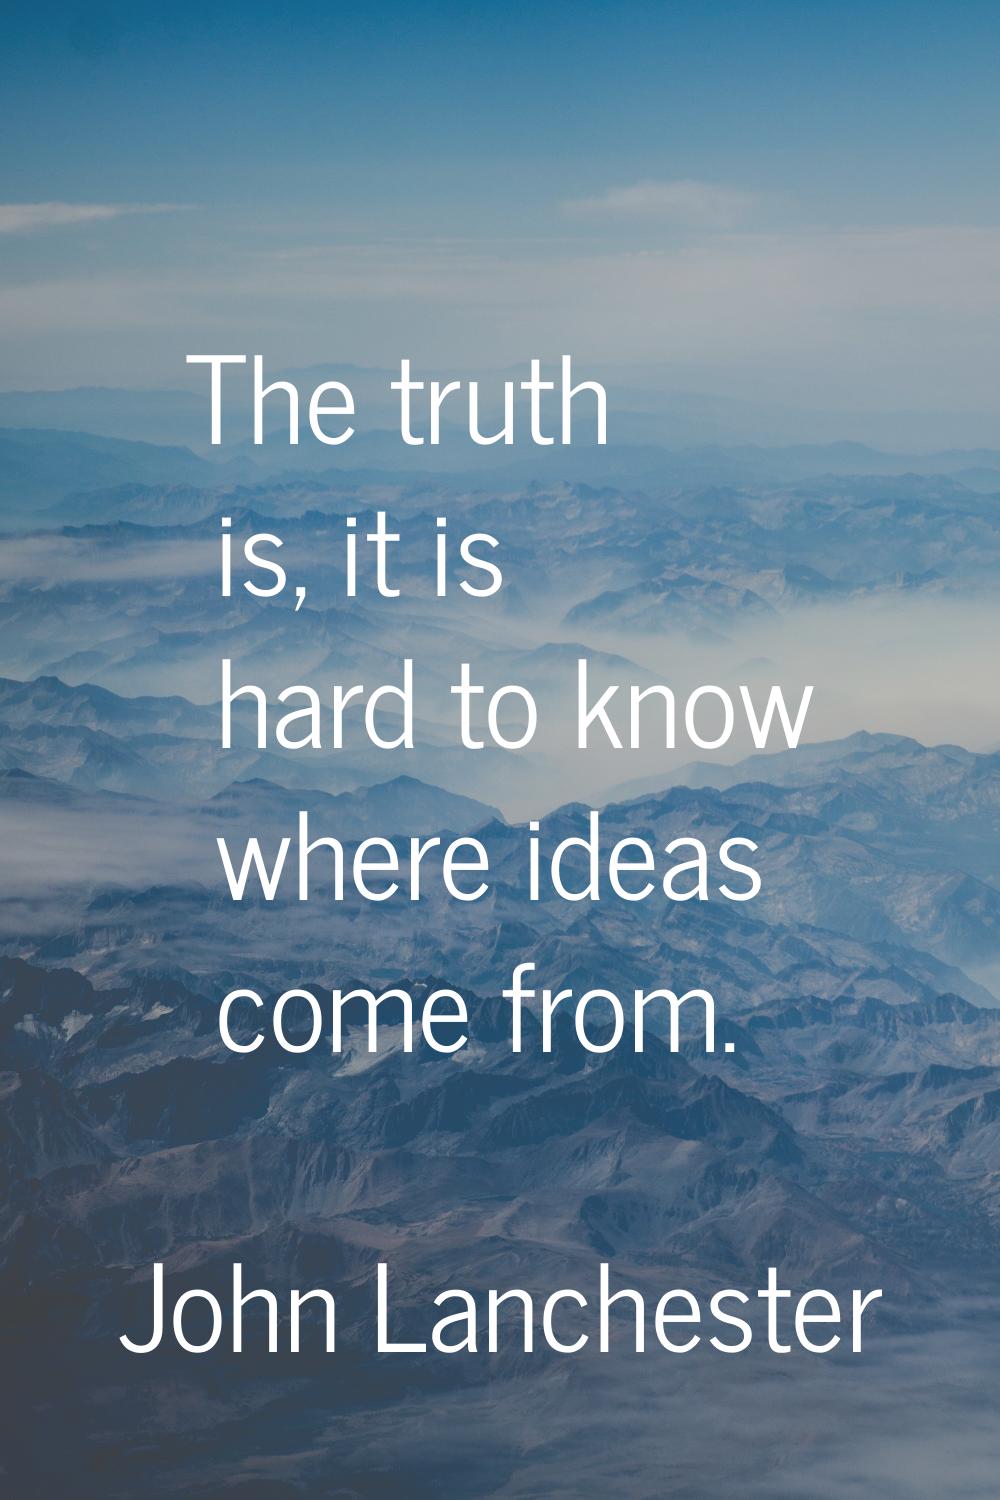 The truth is, it is hard to know where ideas come from.